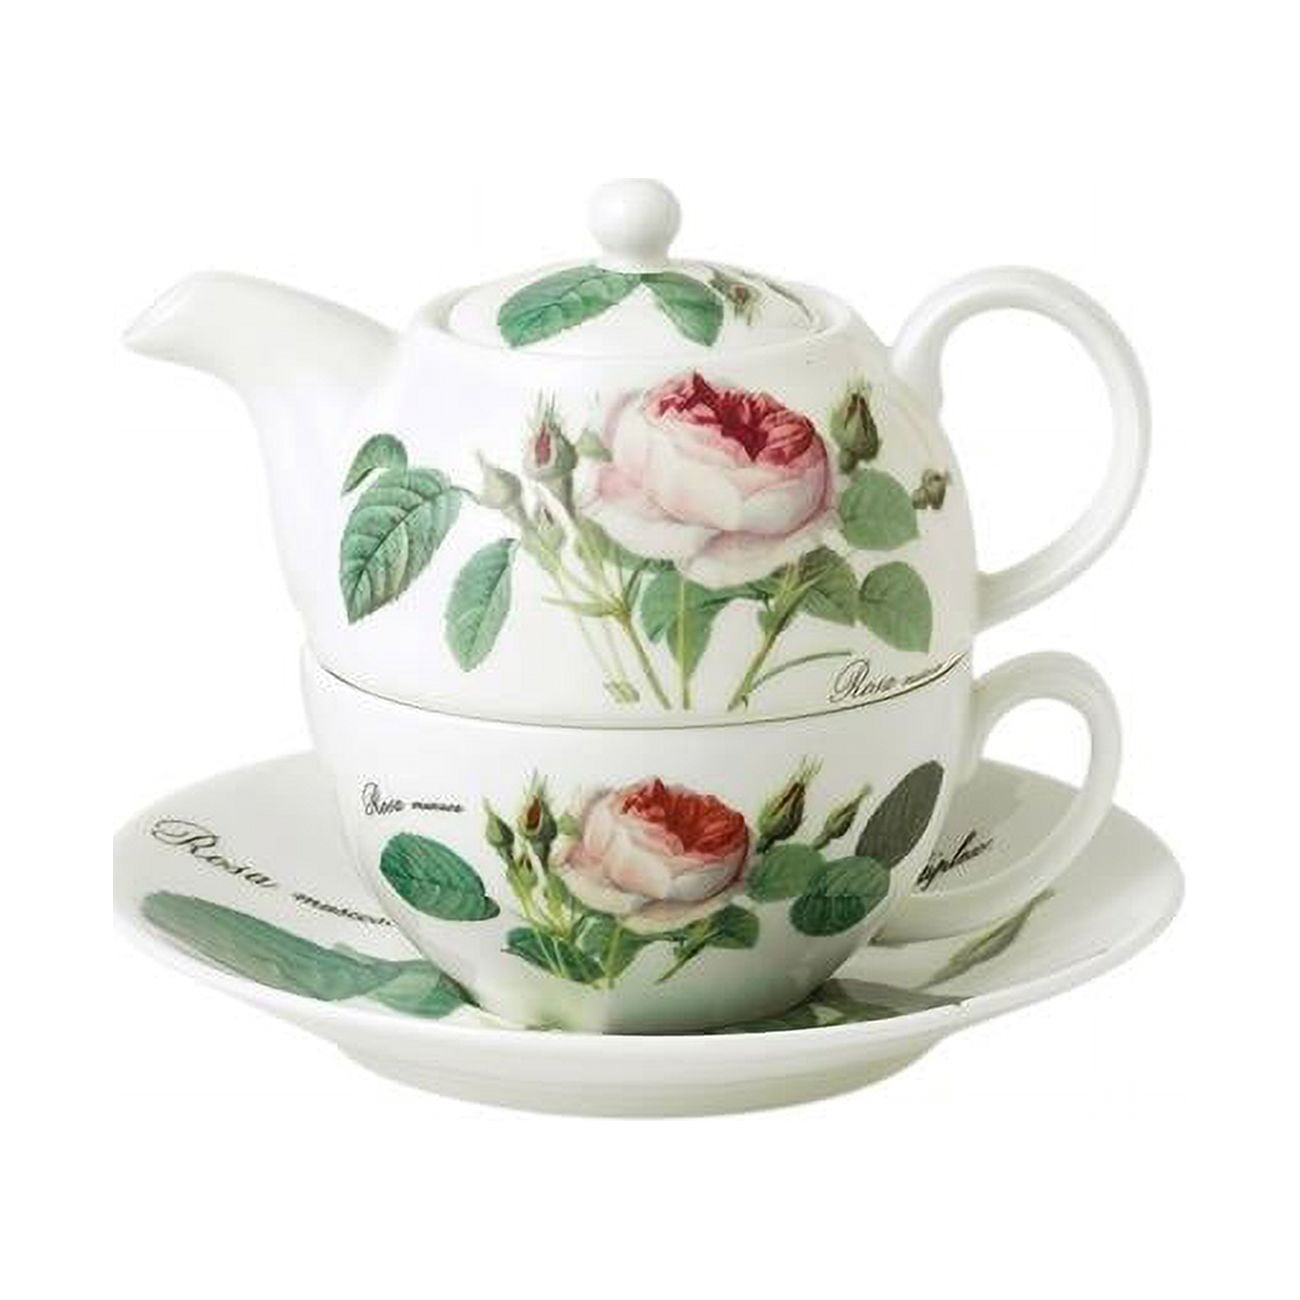 Picture of Roy Kirkham ER3001 Tea for One Teapot with Tea Cup and Saucer - Redoute Rose